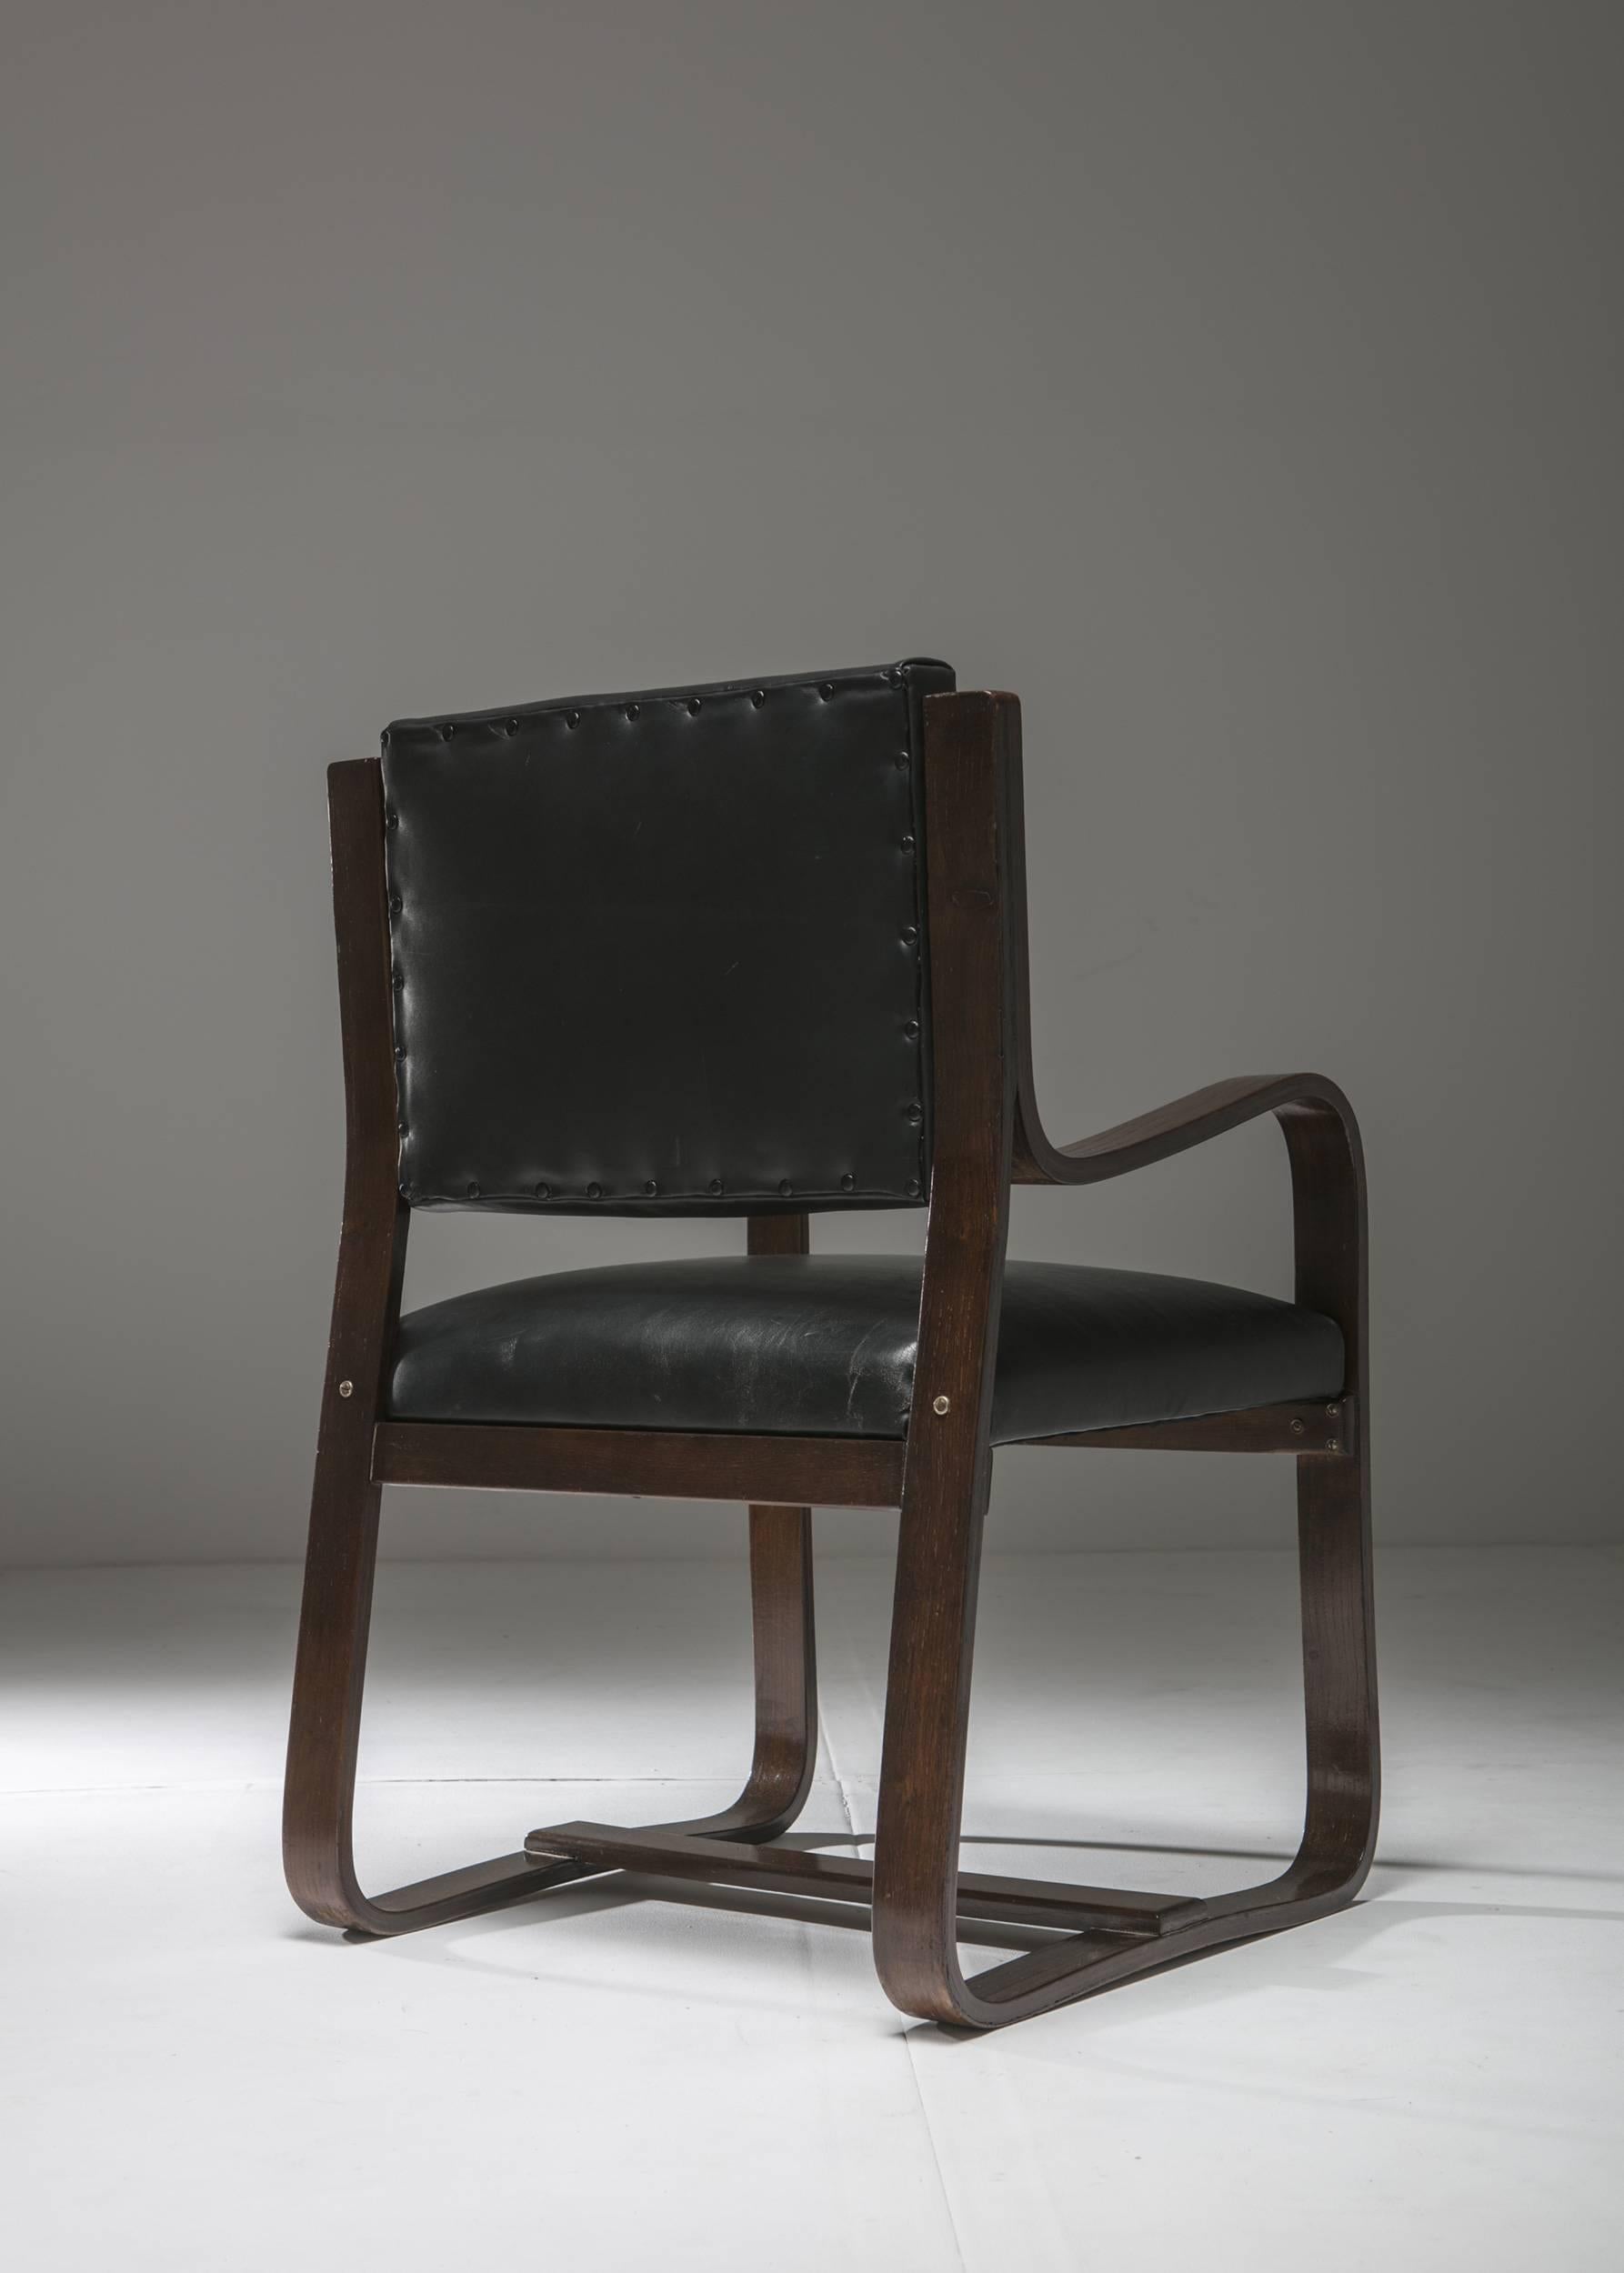 Rare plywood armchair by Giuseppe Pagano.
Scandinavian and rationalist influences on this piece in black leather cover and plywood frame.